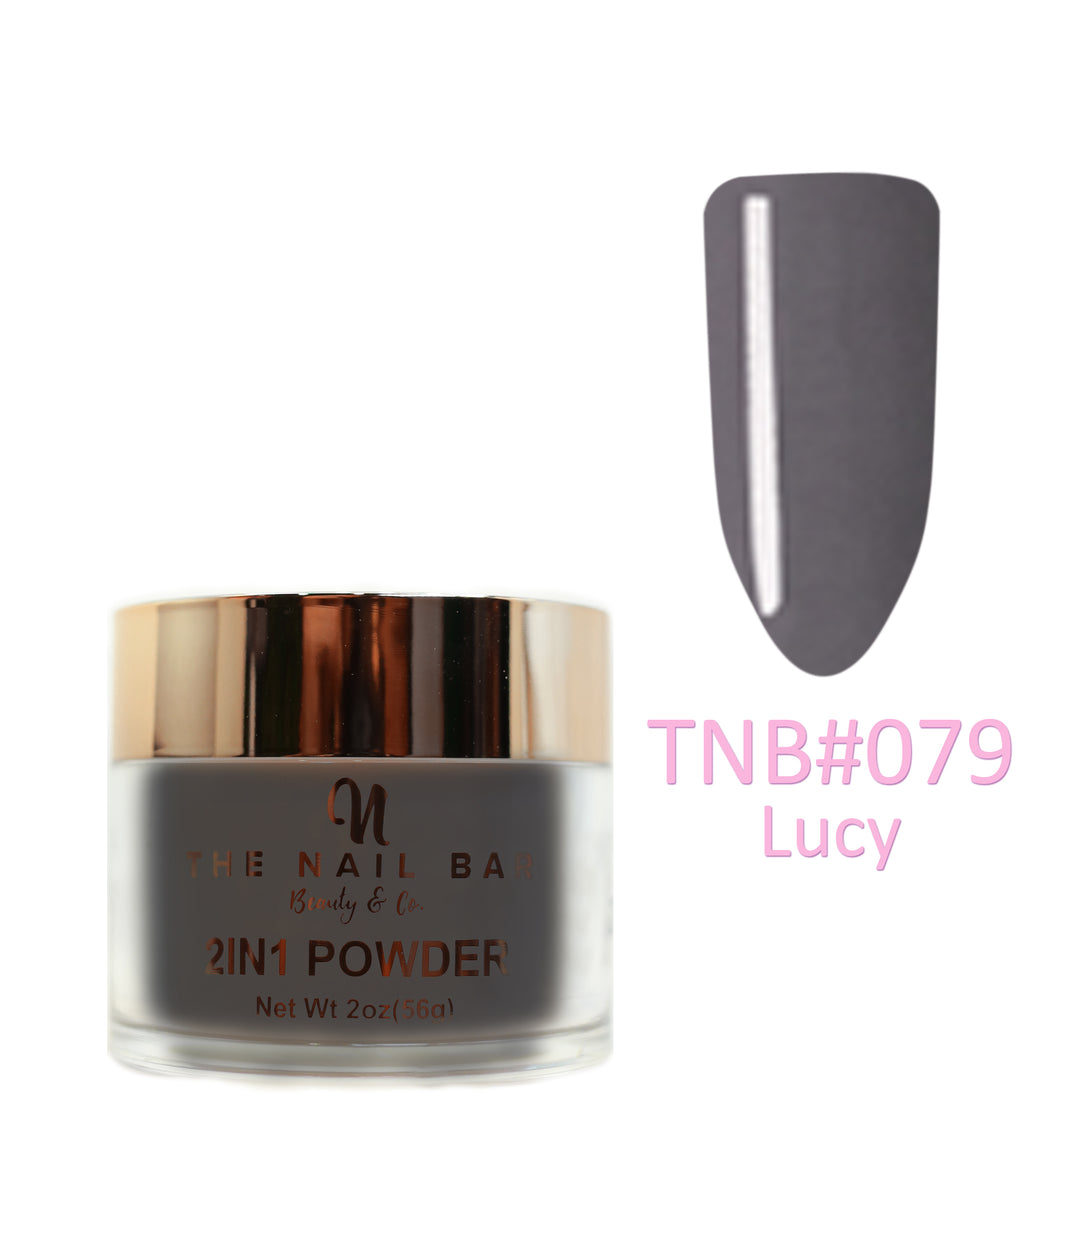 2-In-1 Dipping/Acrylic colour powder (2oz) -Lucy - The Nail Bar Beauty & Co.